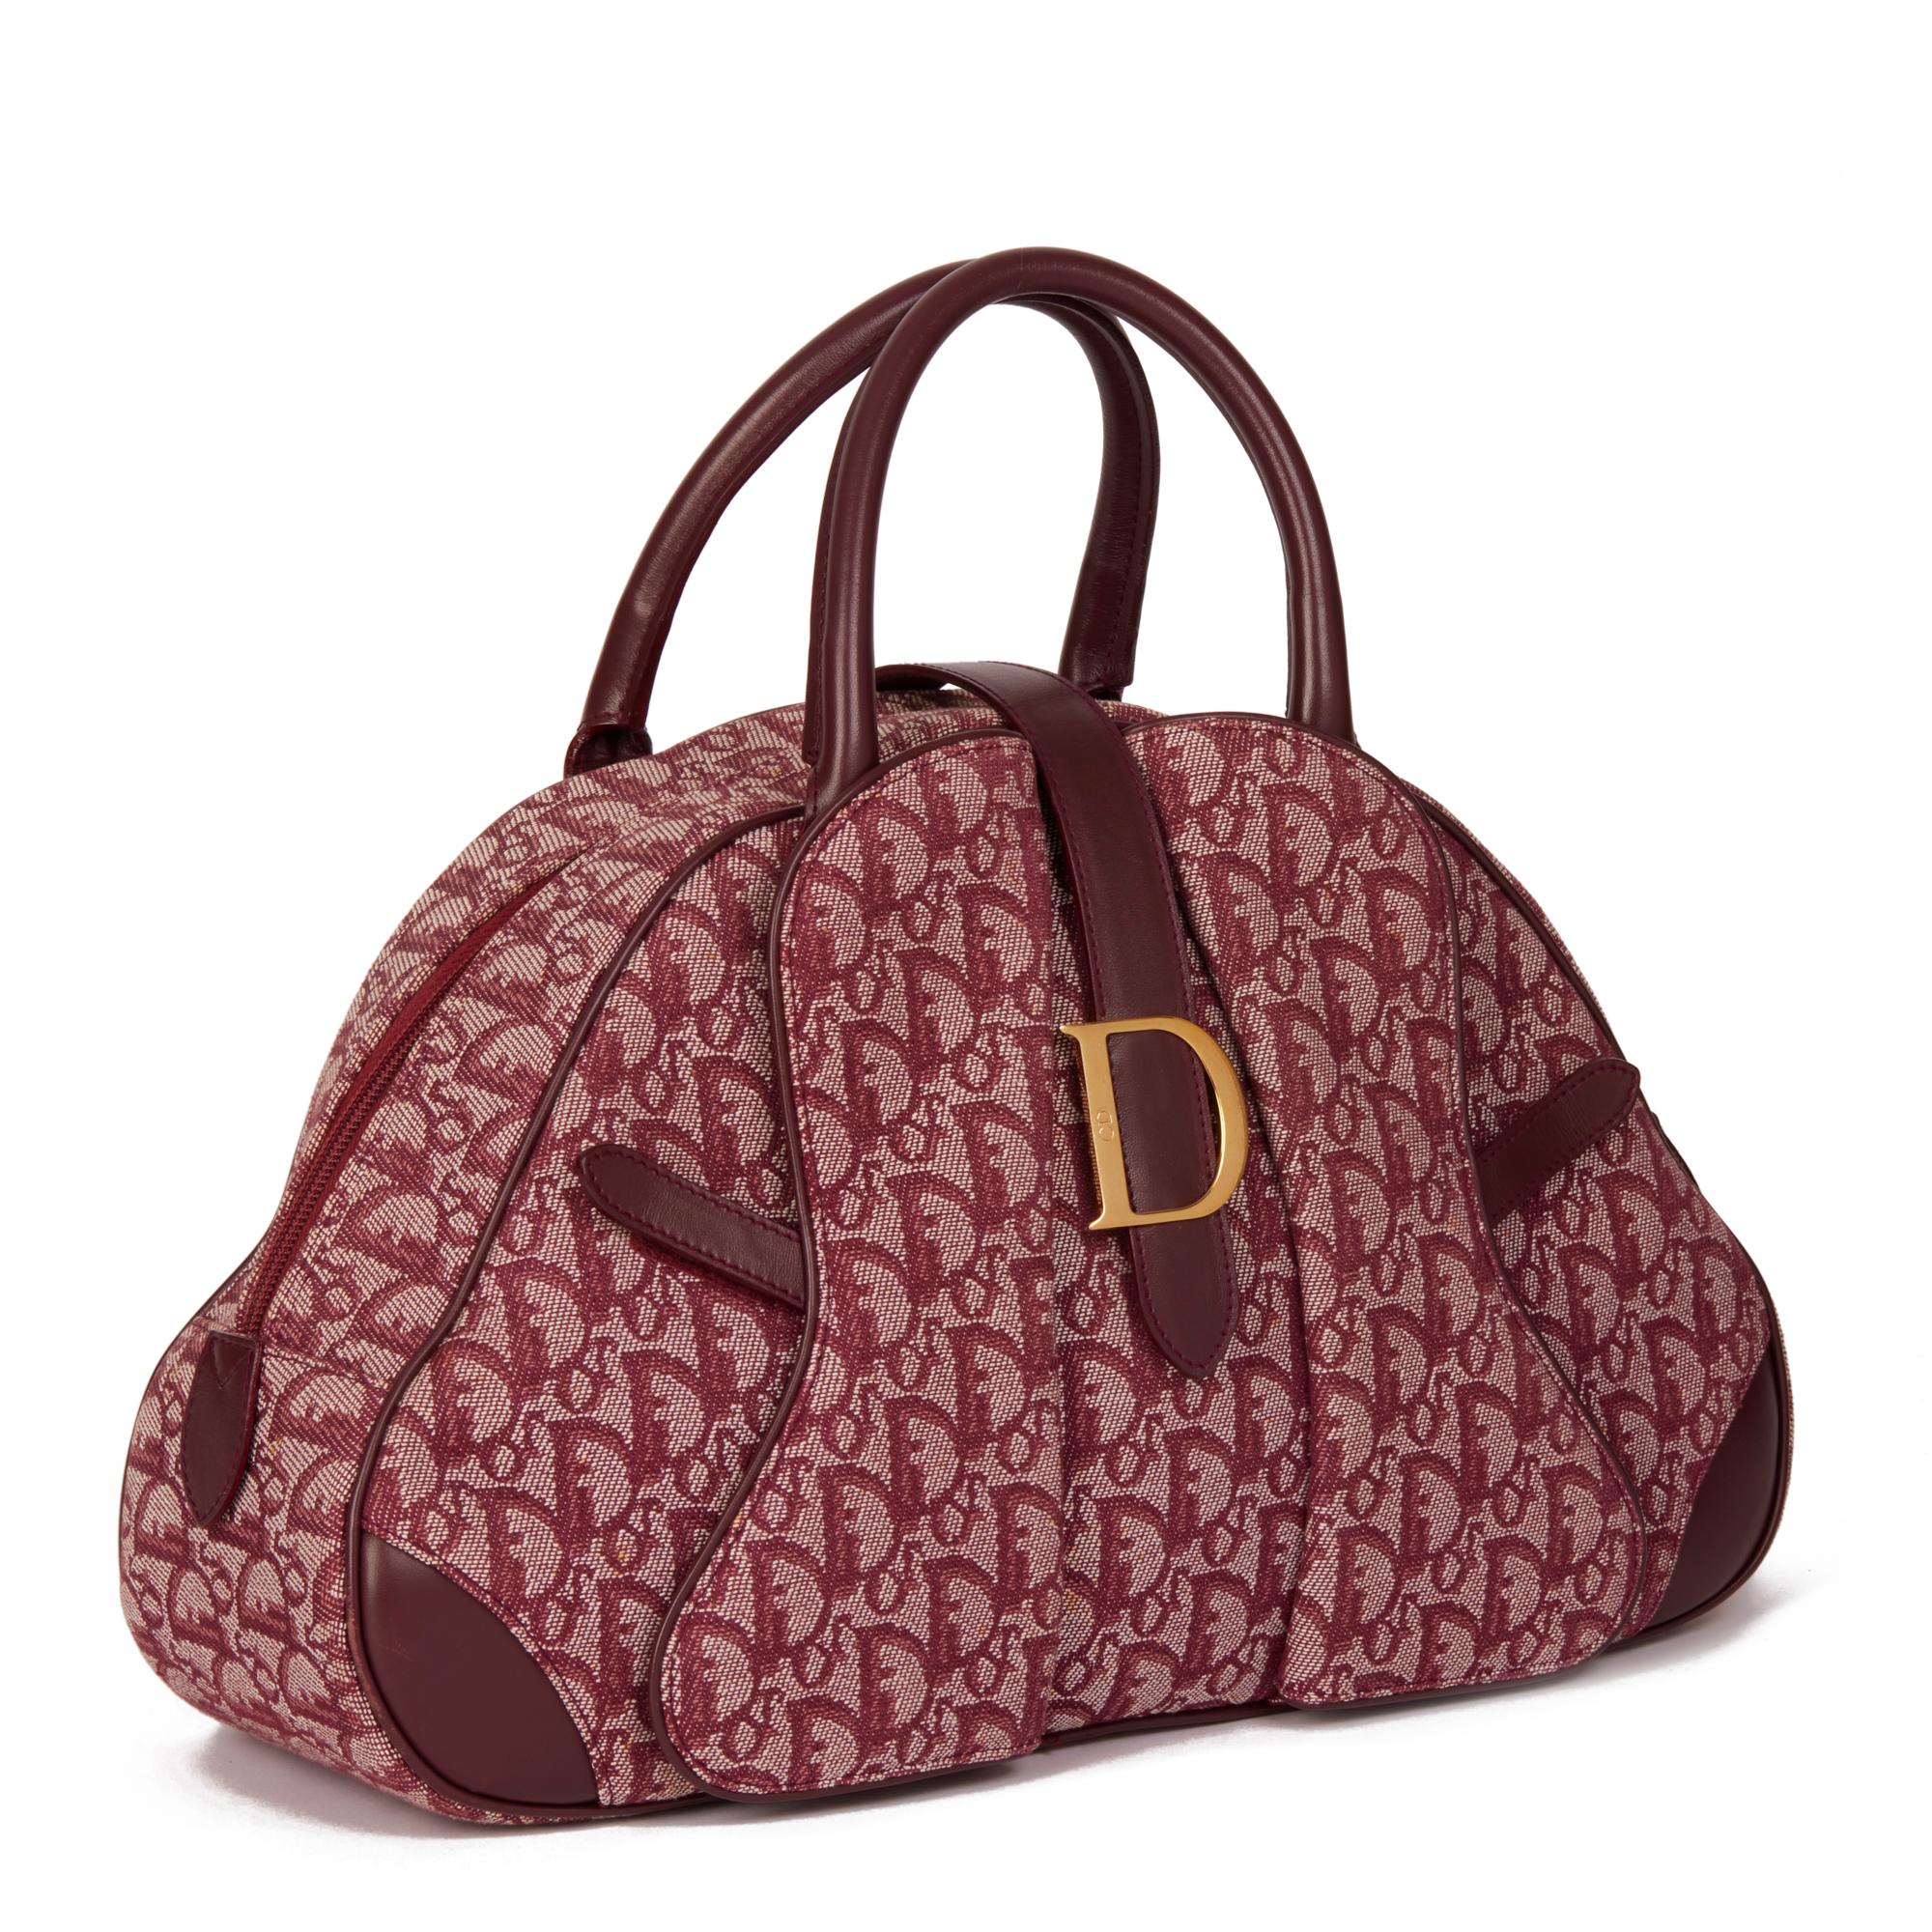 CHRISTIAN DIOR
Bordeaux Monogram Canvas & Calfskin Leather Vintage Saddle Tote

Serial Number: MA-1021
Age (Circa): 2001
Accompanied By: Care Booklet, Authenticity Card
Authenticity Details: Date Stamp, Authenticity Card (Made in Italy)
Gender: